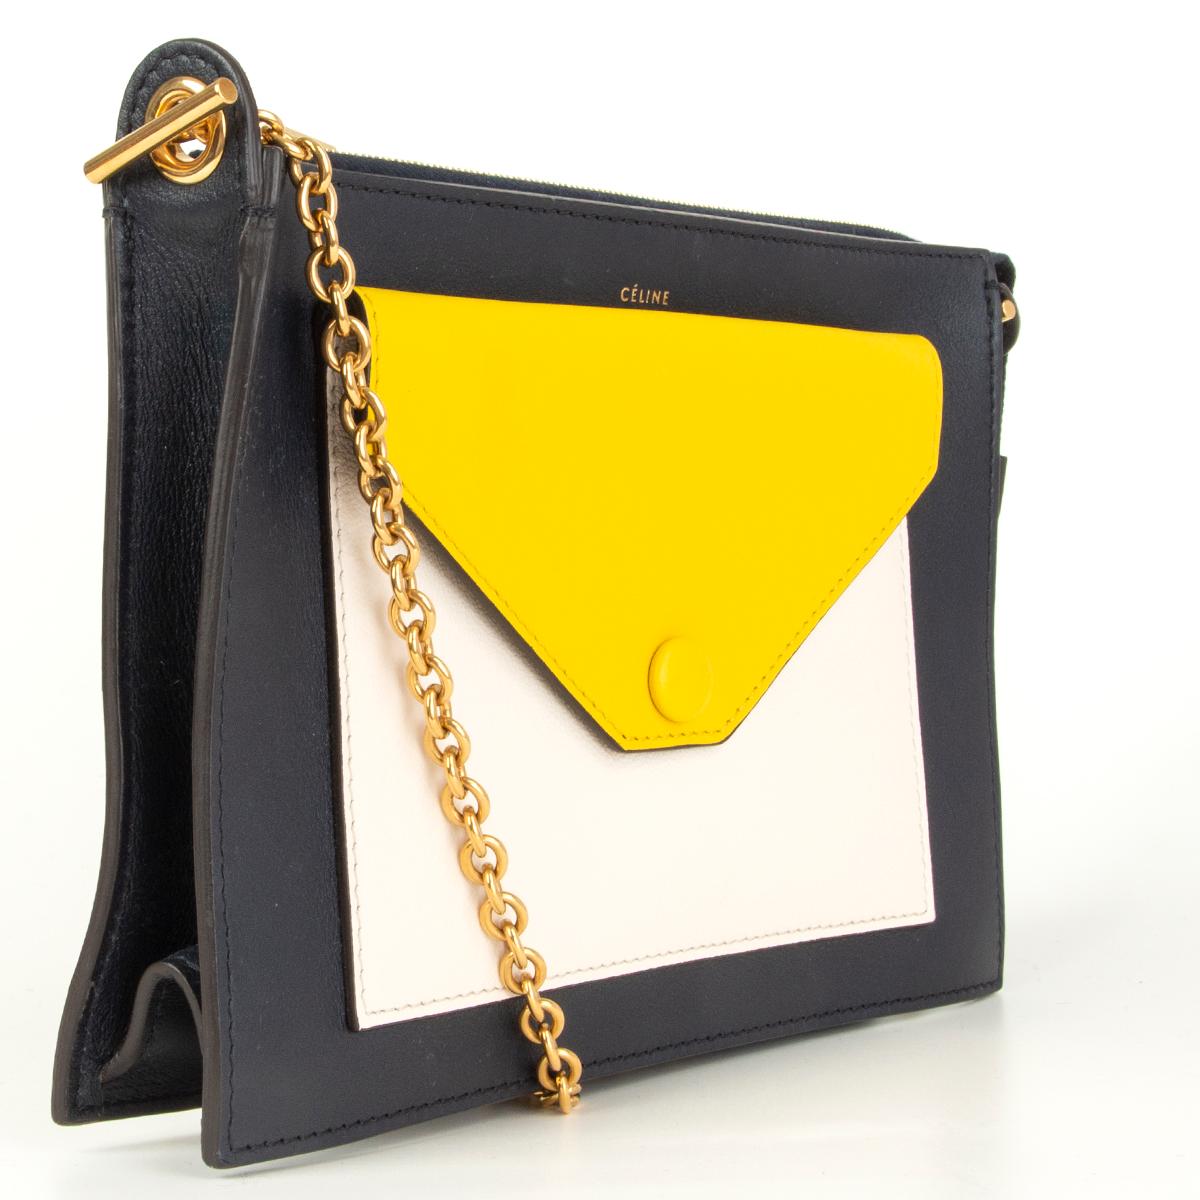 Céline 'Pocket Medium Chain' shoulder bag/clutch in midnight blue, yellow and off-white calfskin. Opens with a zipper on top and is lined in midnight blue calfskin. Comes with a detachable shoulder strap. Has been carried and the yellow flap has two